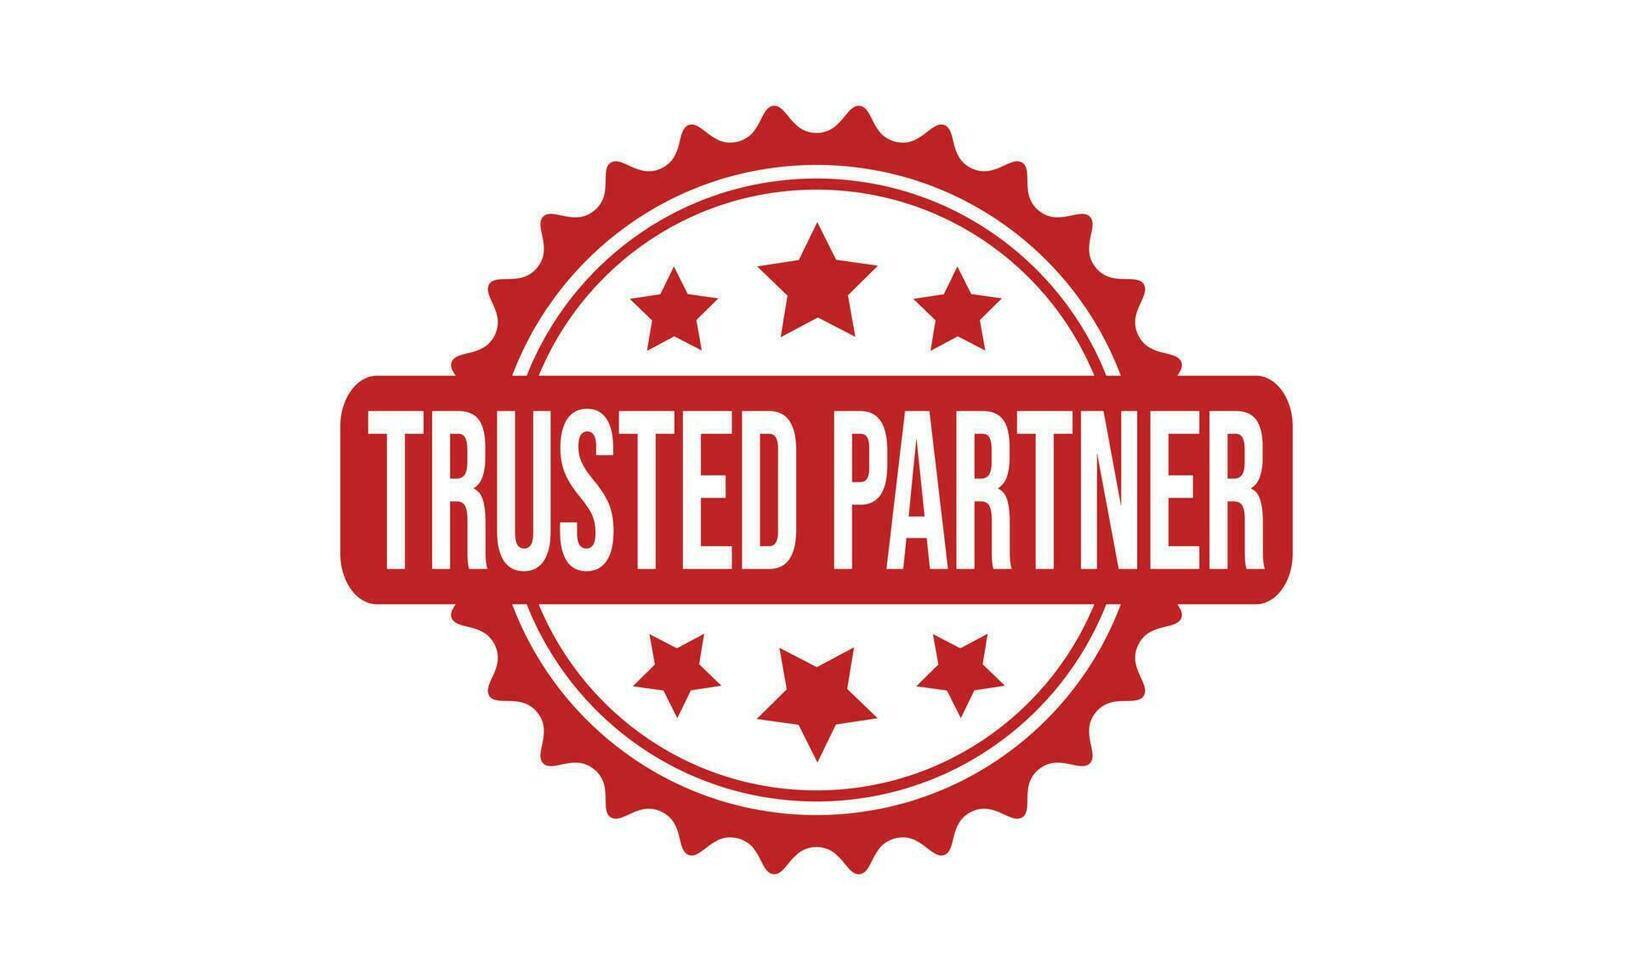 trusted-partner-rubber-stamp-seal-vector